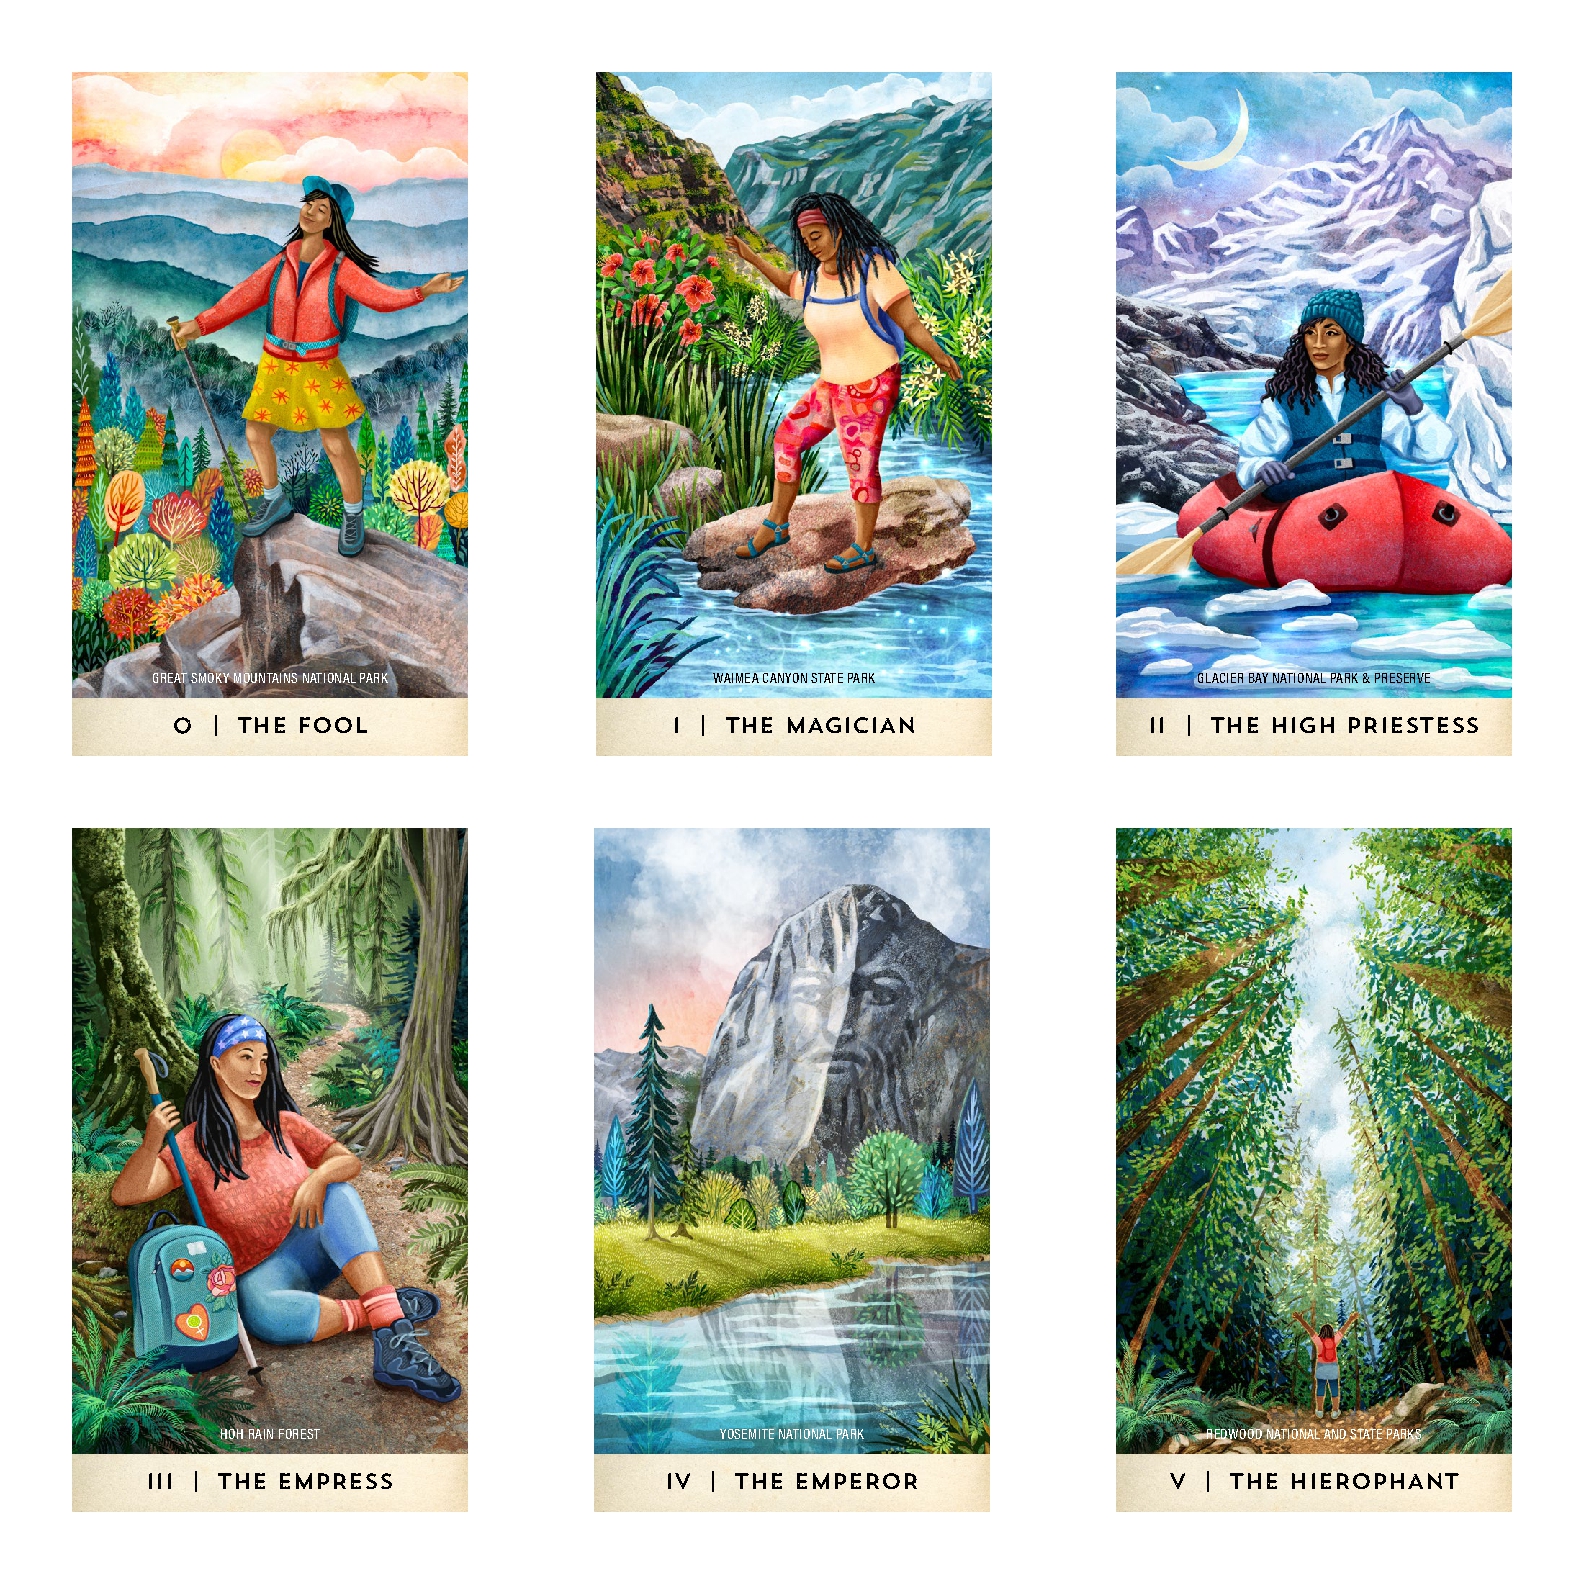 Tarot for the Great Outdoors